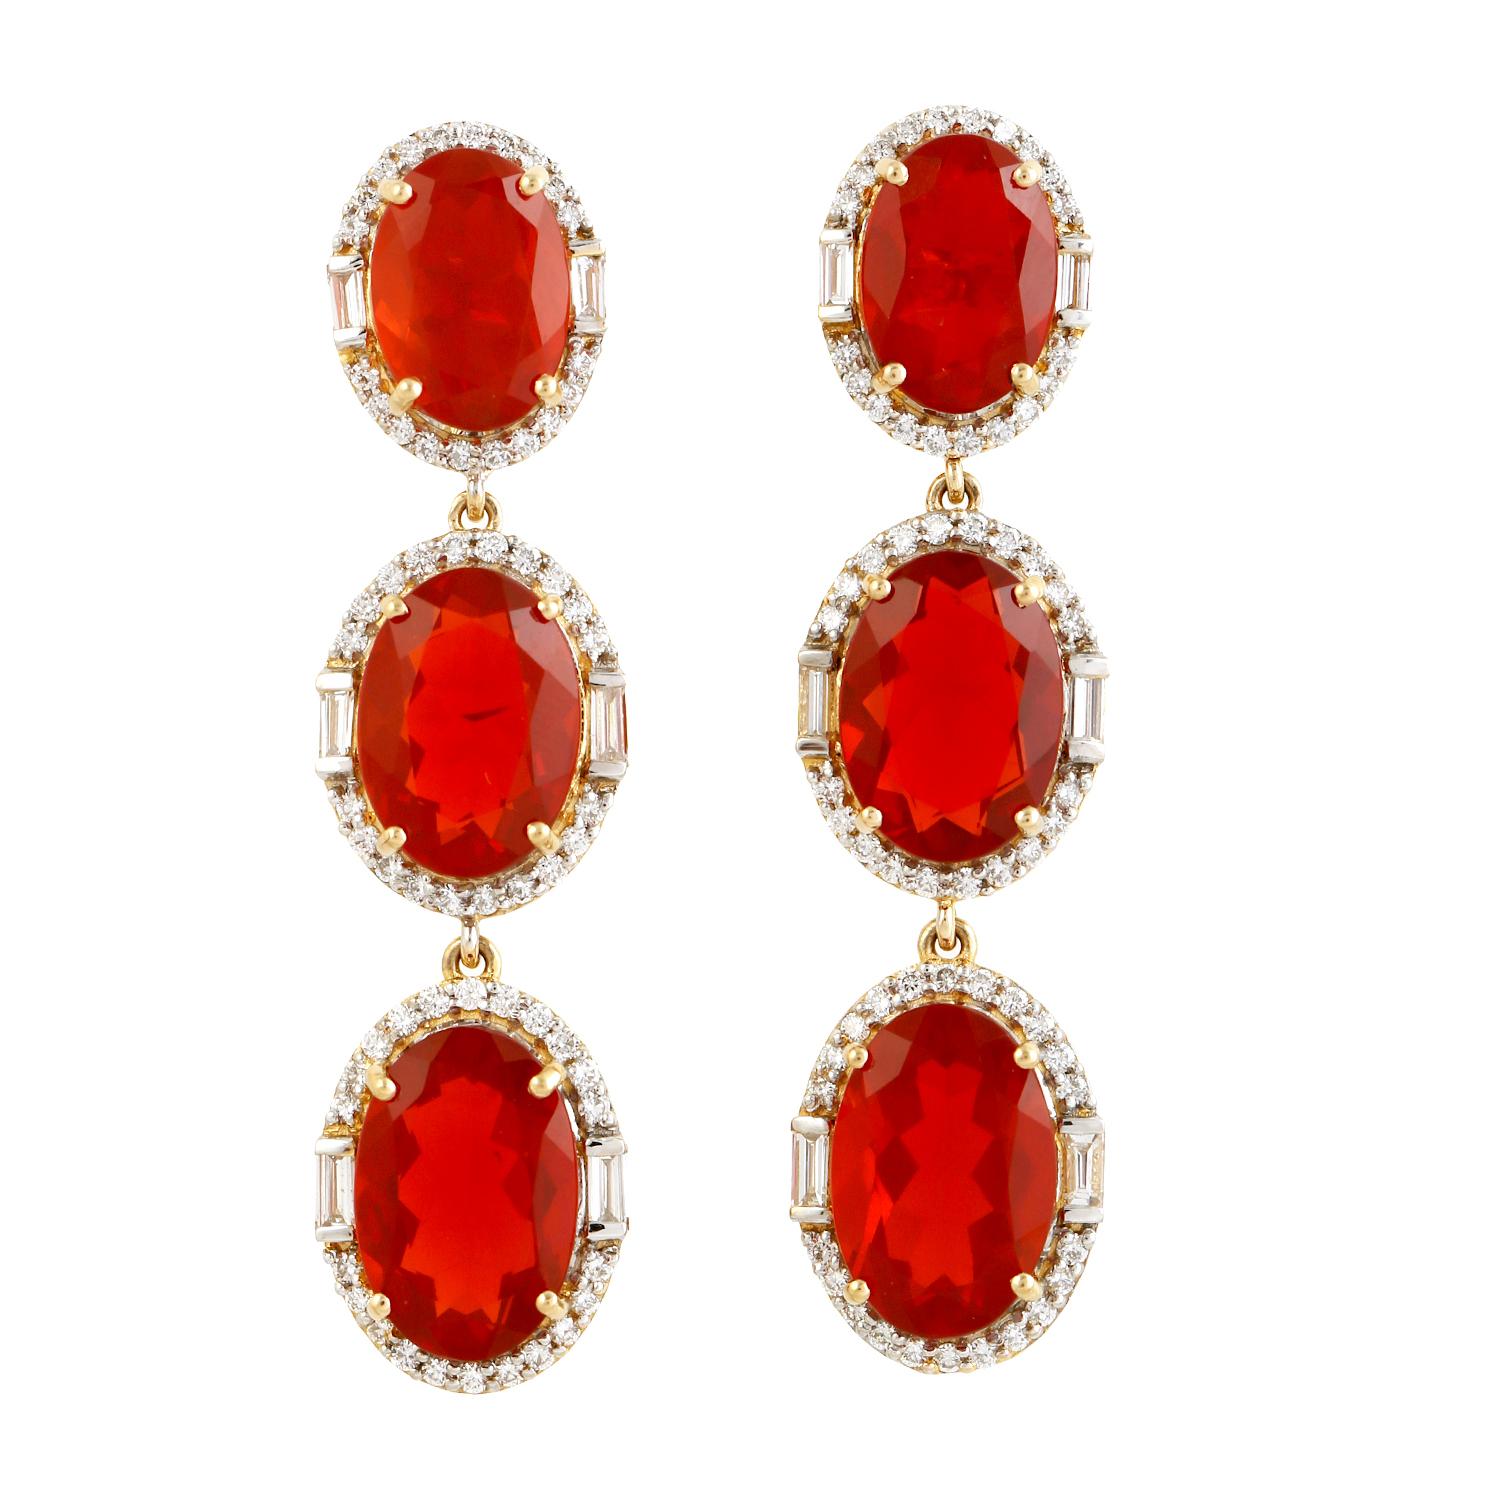 Mixed Cut Three Tier Fire Opal Earrings With Diamonds Made In 18k Yellow Gold For Sale